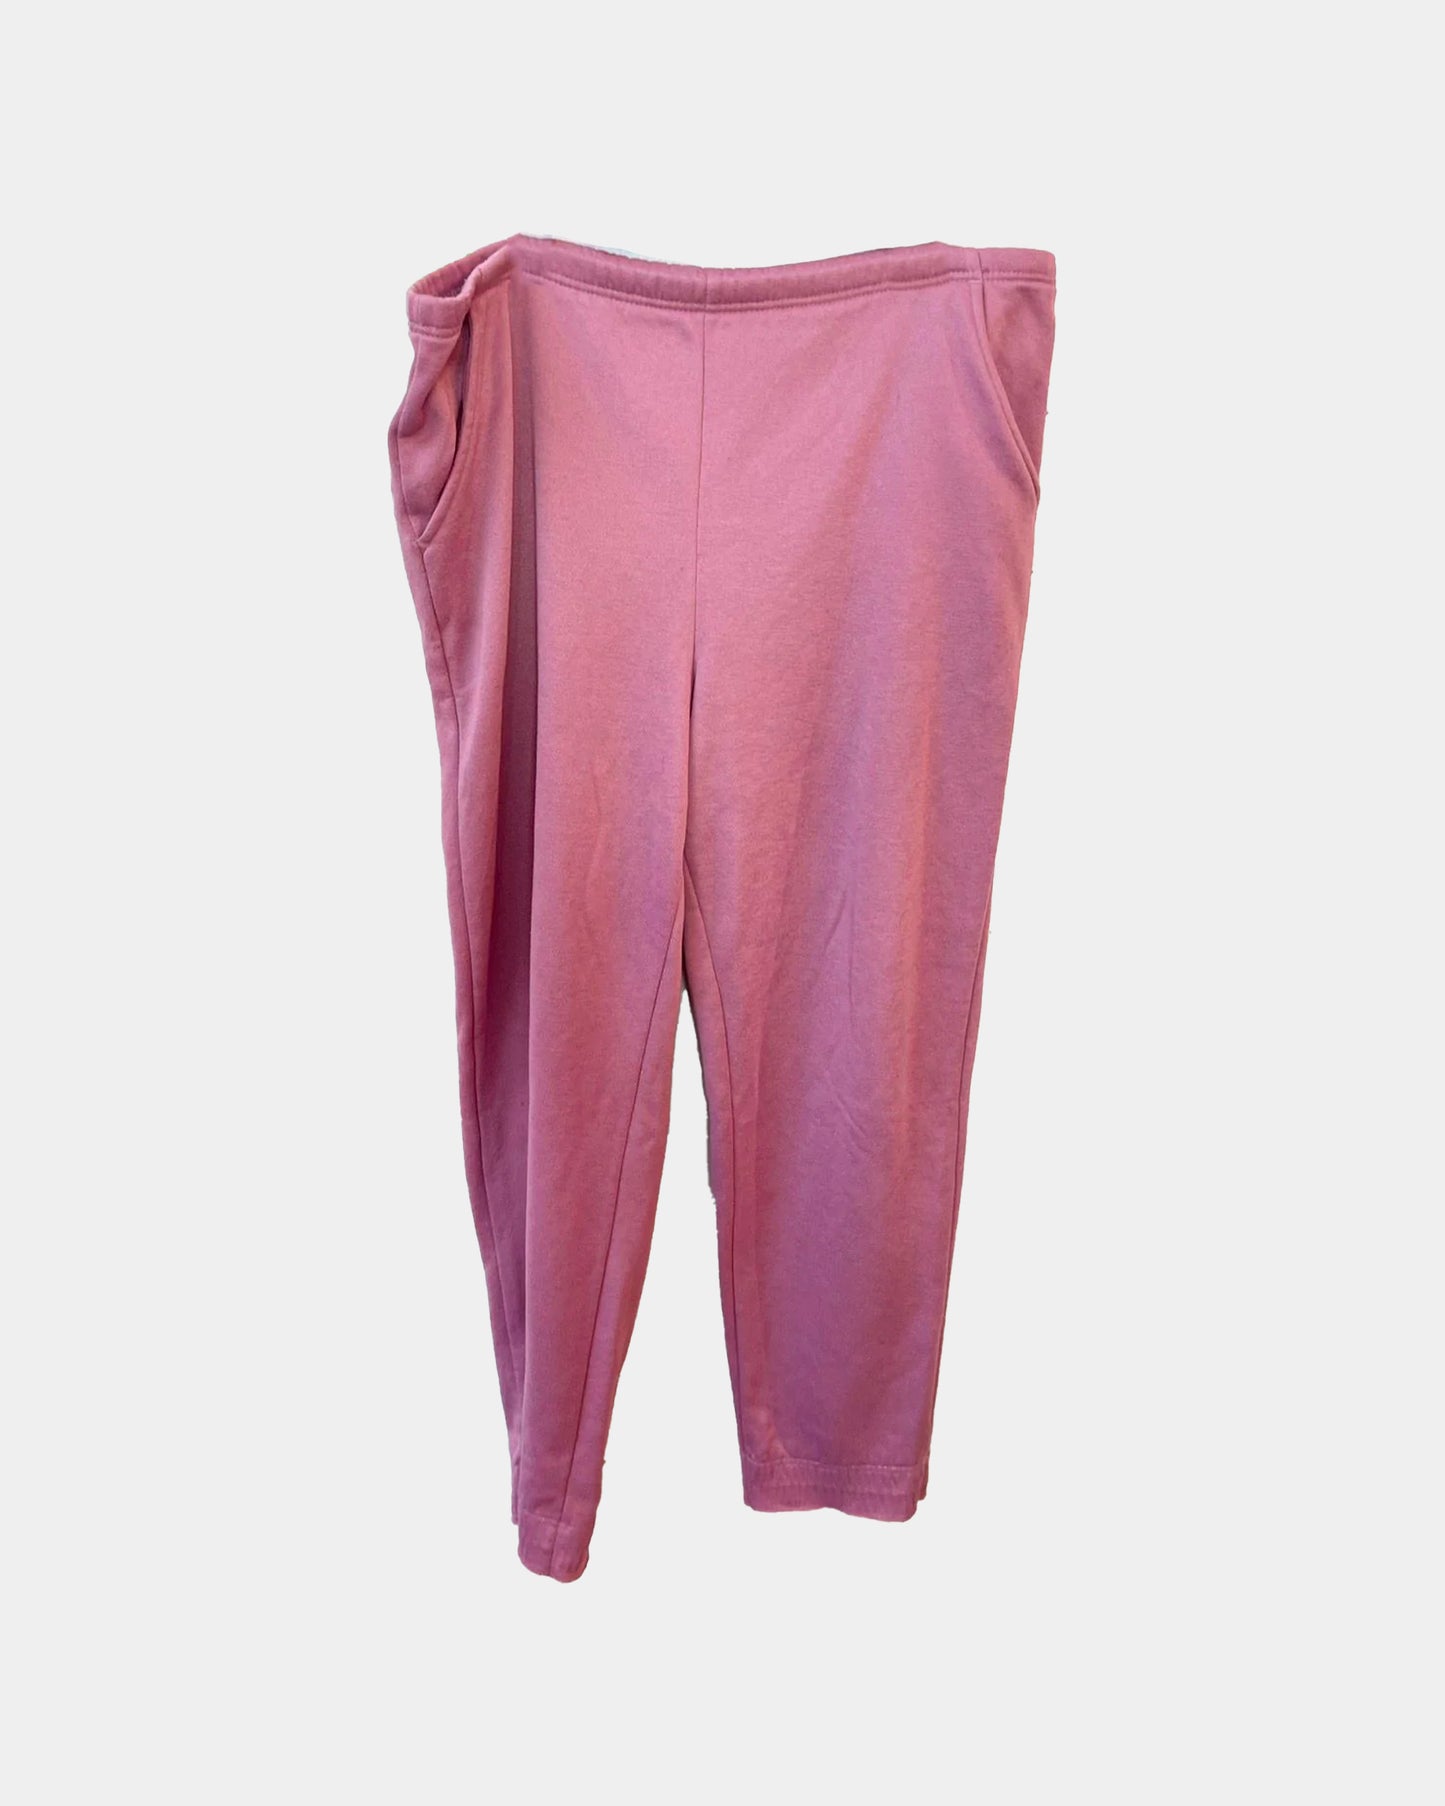 Vintage Pink OLD Person Geriatric Sweatpants Joggers PINK